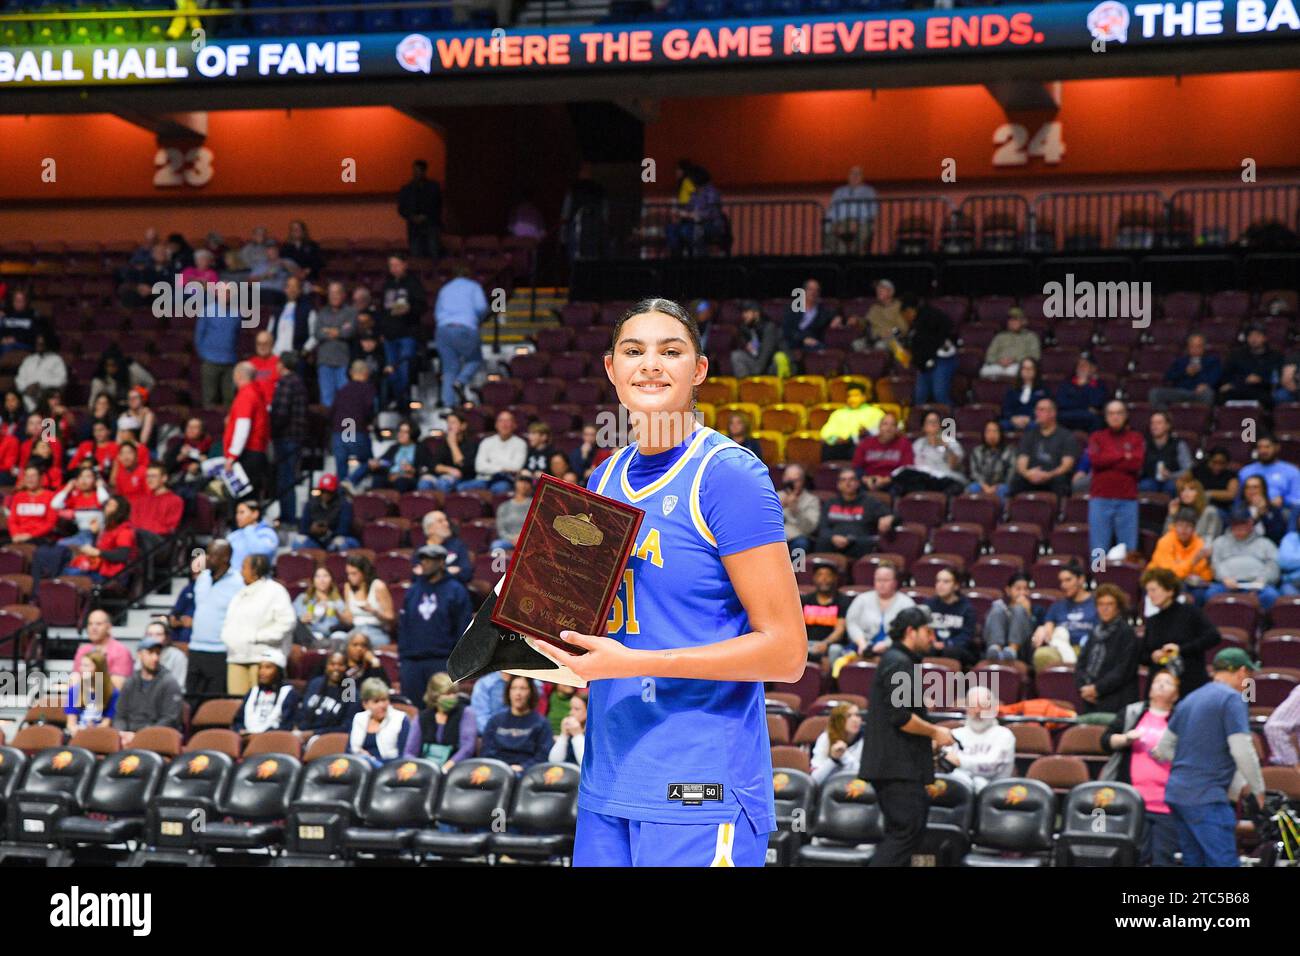 December 10, 2023: UCLA Bruins center Lauren Betts (51) poses for a photo  with the Most Valuable Player award for the NCAA women's basketball game in  the Invesco QQQ Basketball Hall of